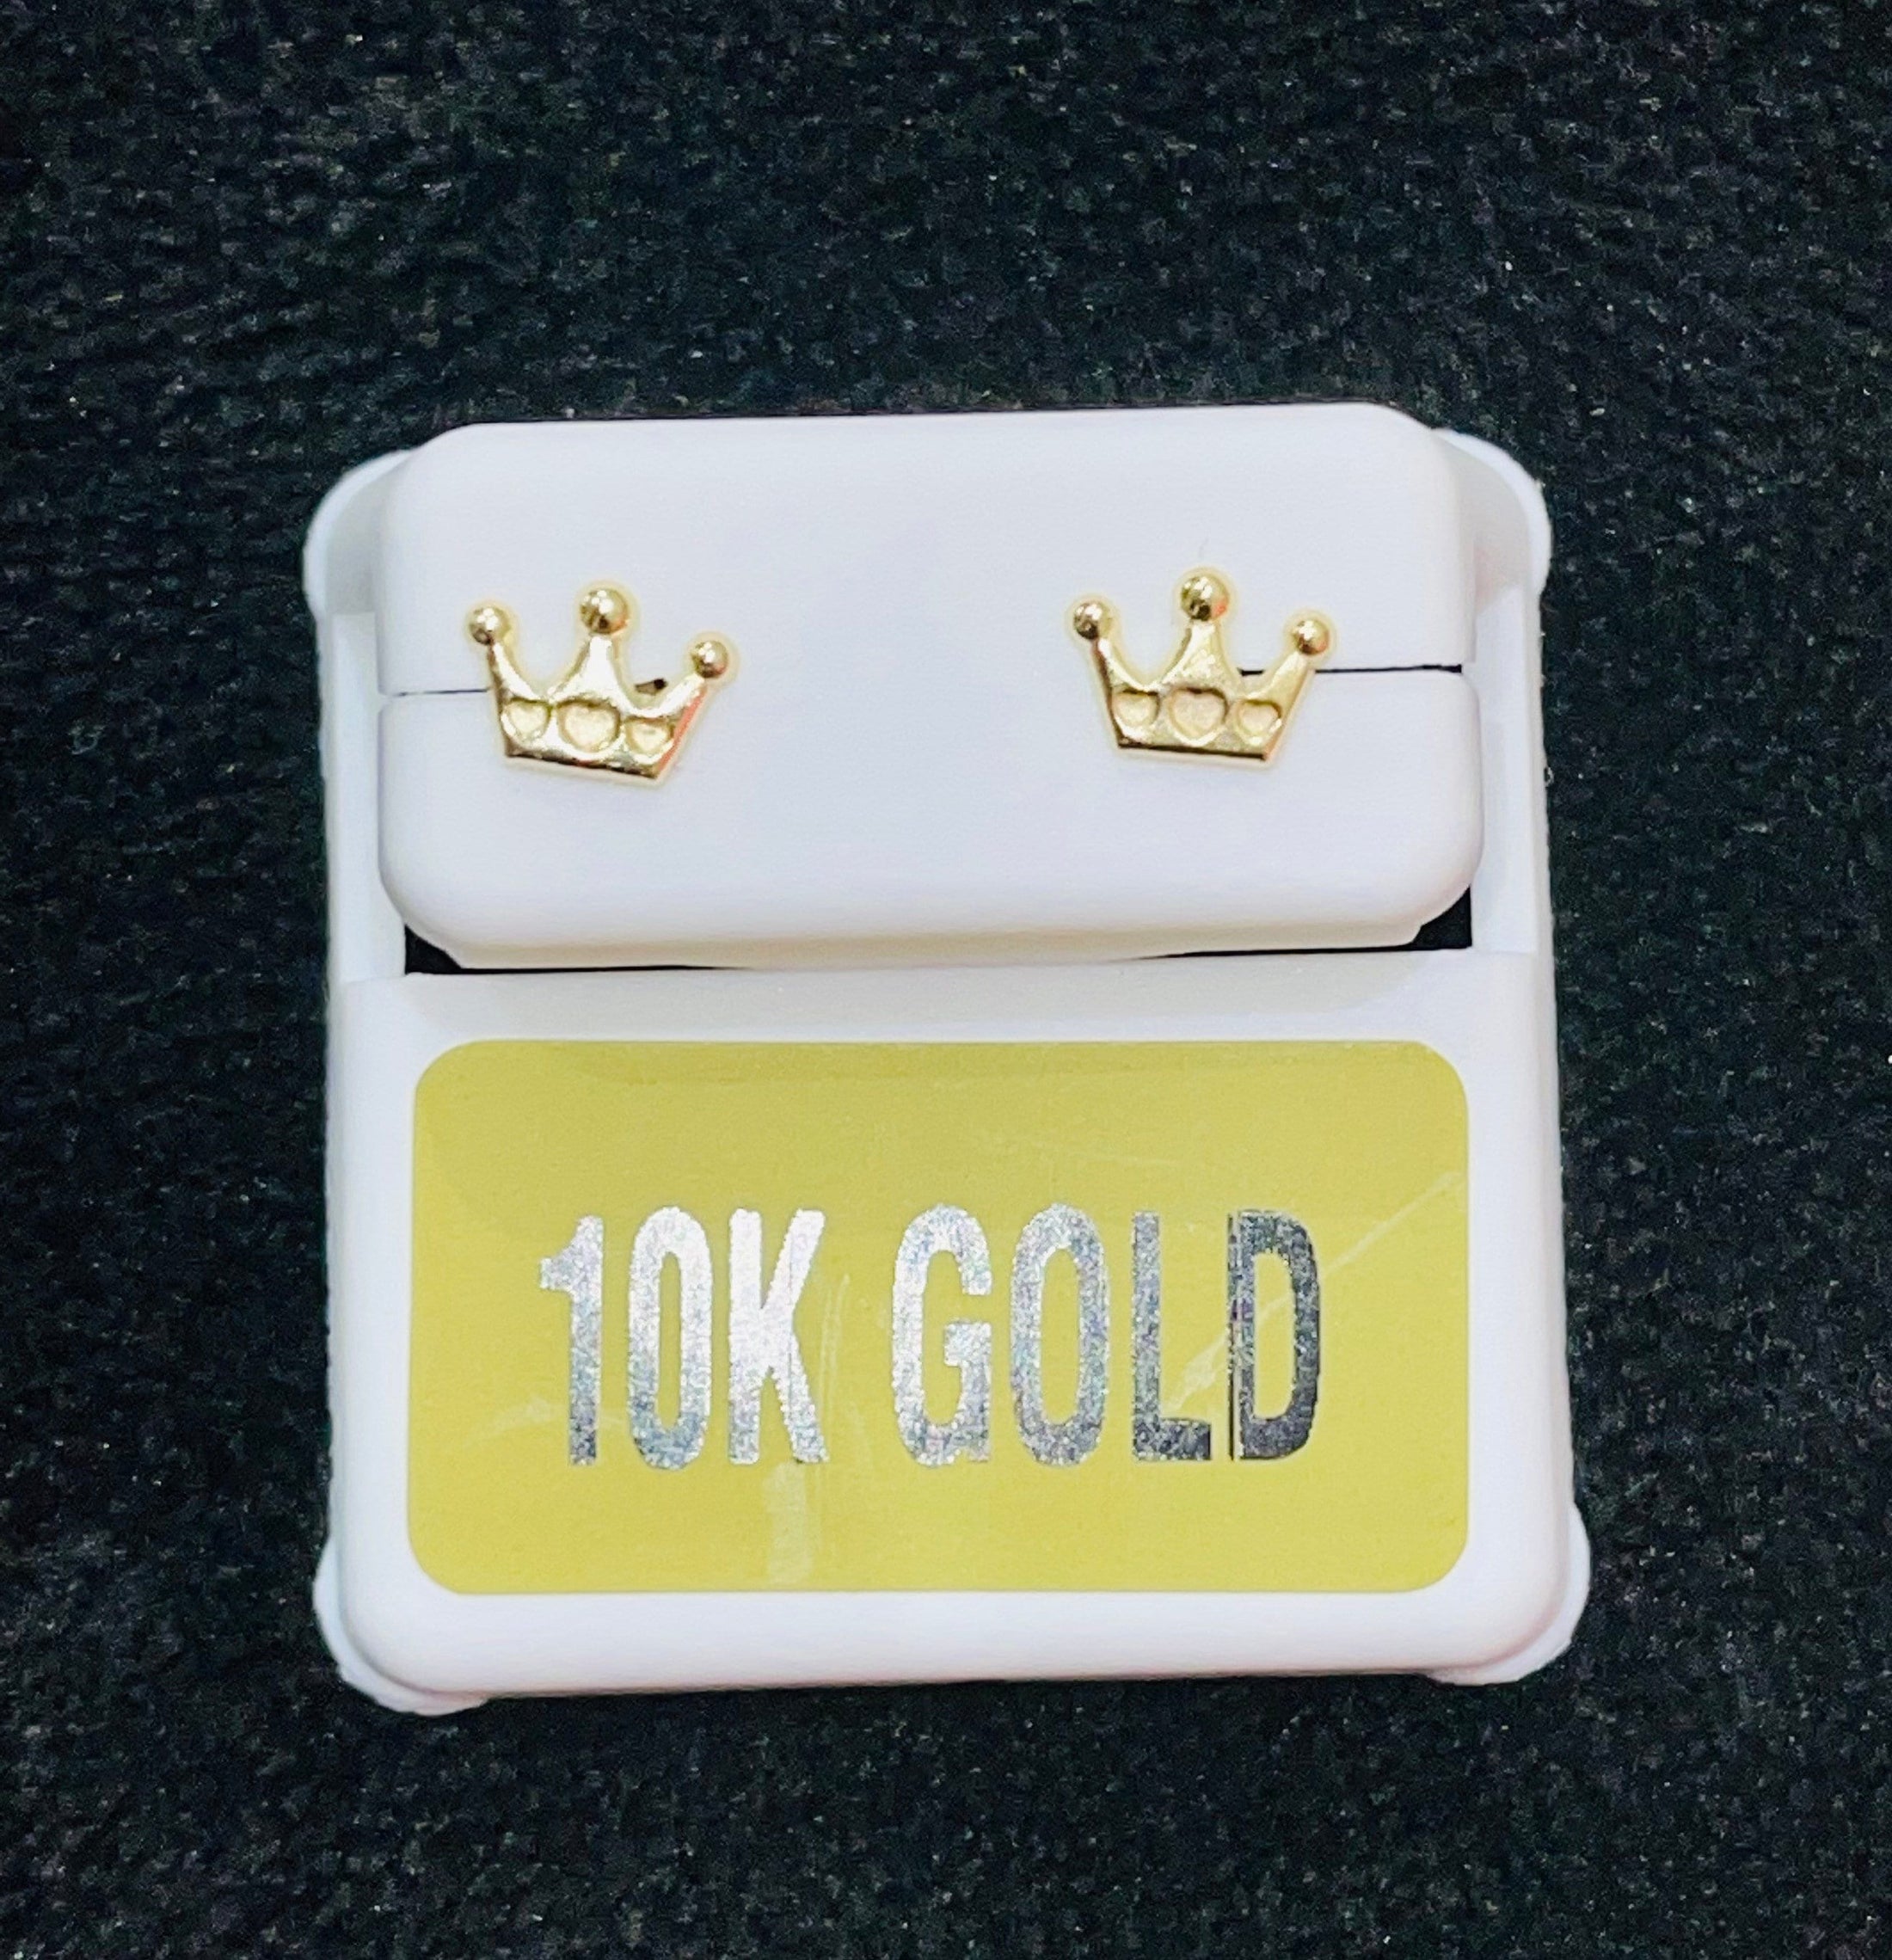 10k real gold crown earrings, Dainty crown studs, Gifts for girls, Kids, Women, Best Christmas Gift, Crown earrings, Baby shower, New born